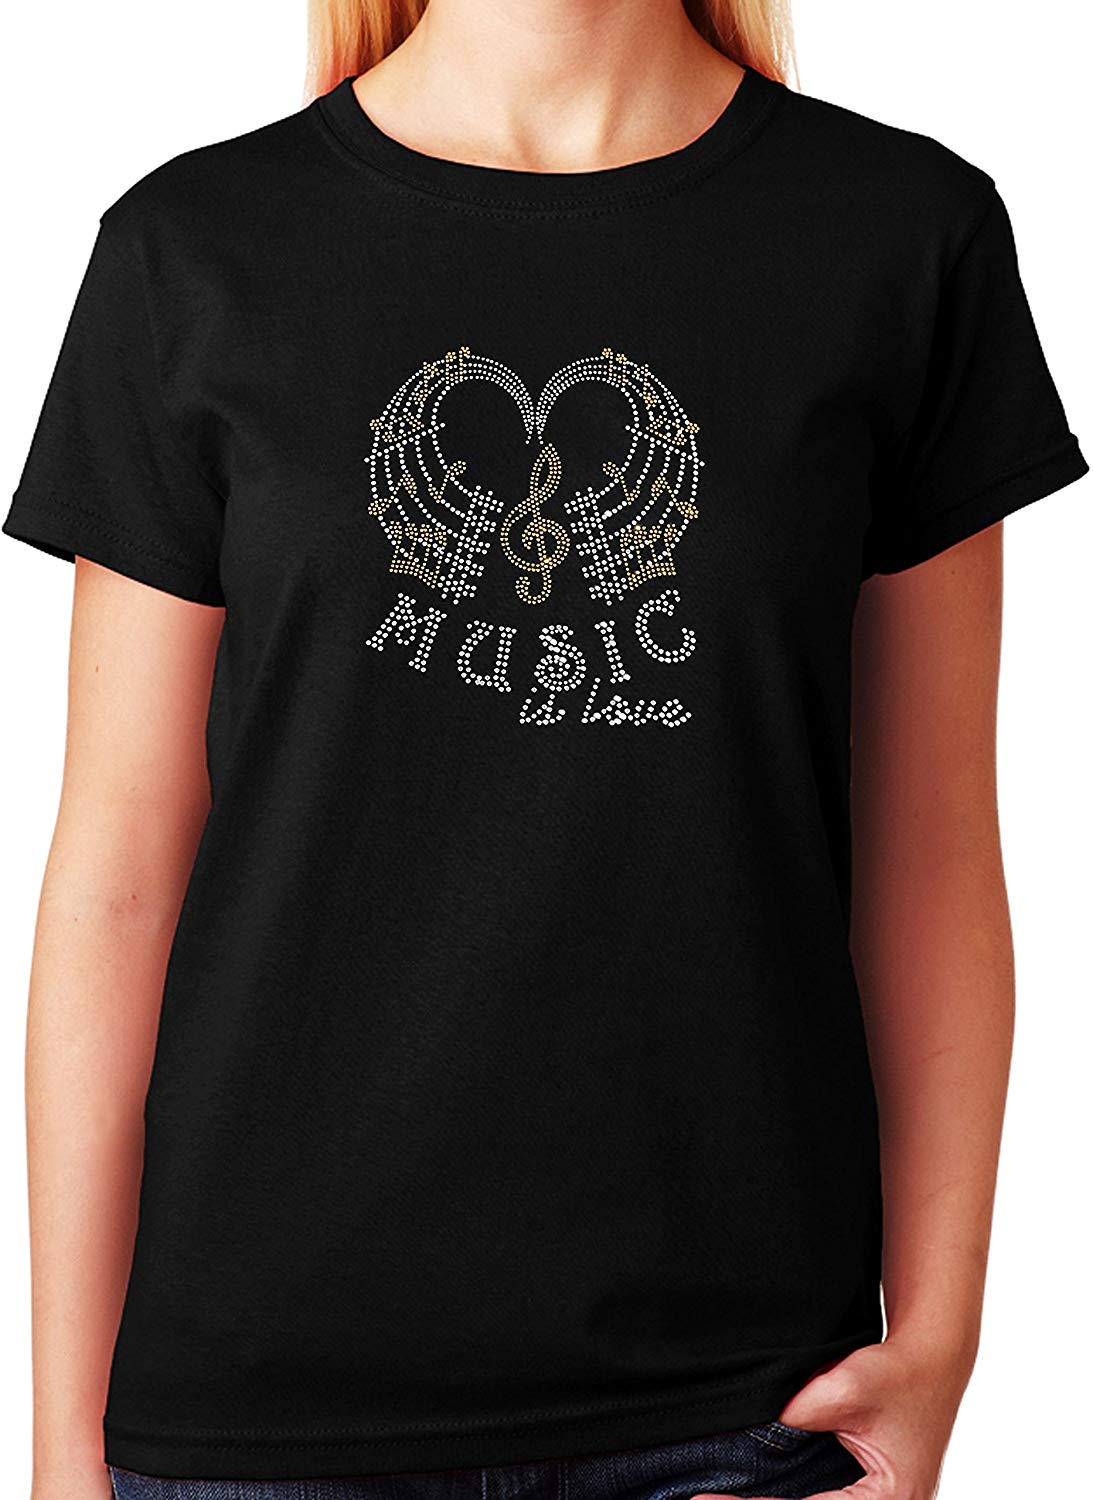 Women's / Unisex T-Shirt with Music Is Love With Music Notes In Rhinestones